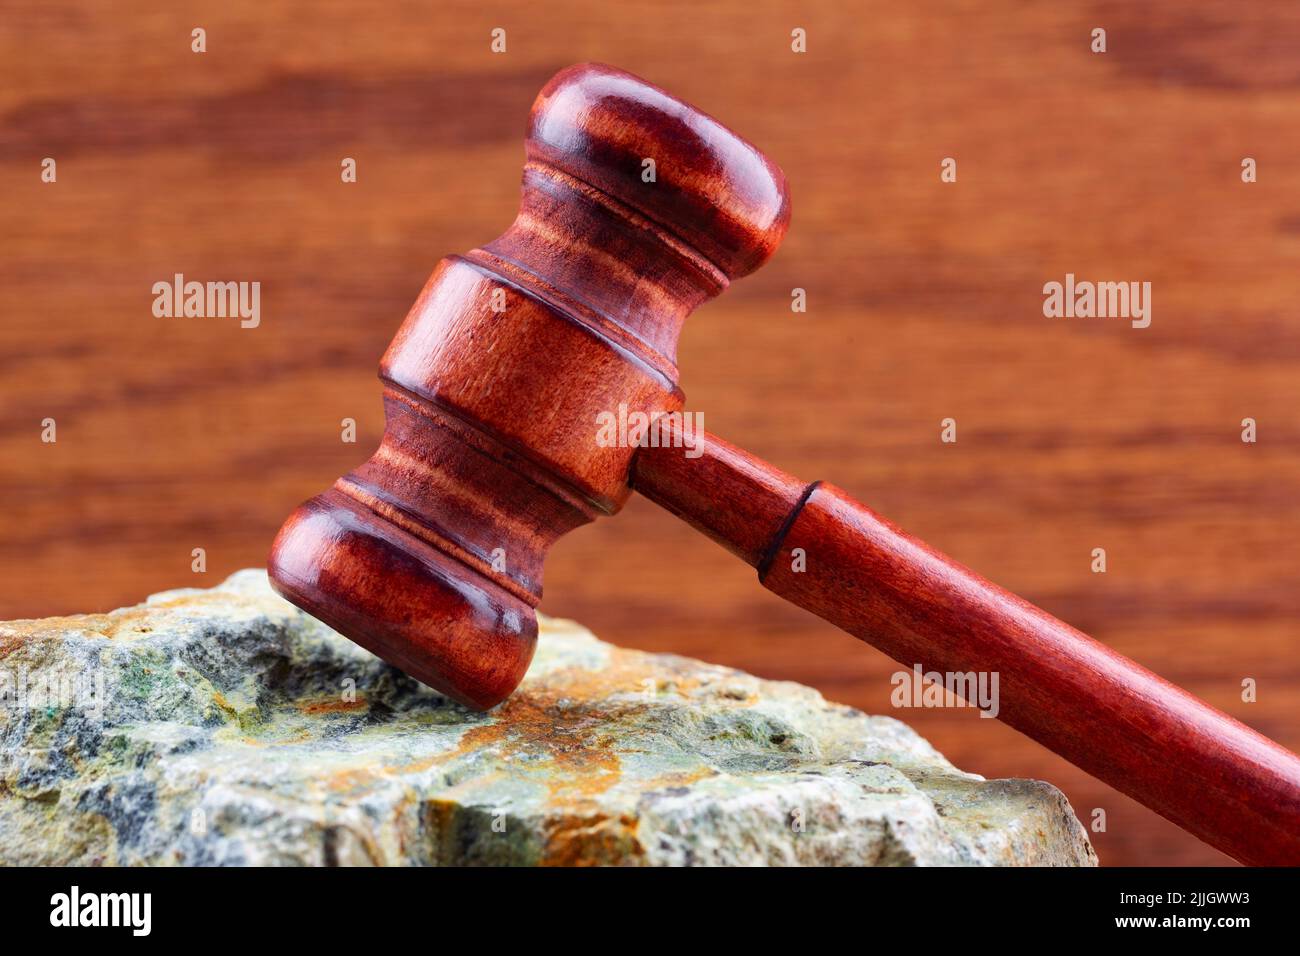 Difficult court and judicial decisions symbolized by gavel placed on rock surface with wood grain background Stock Photo